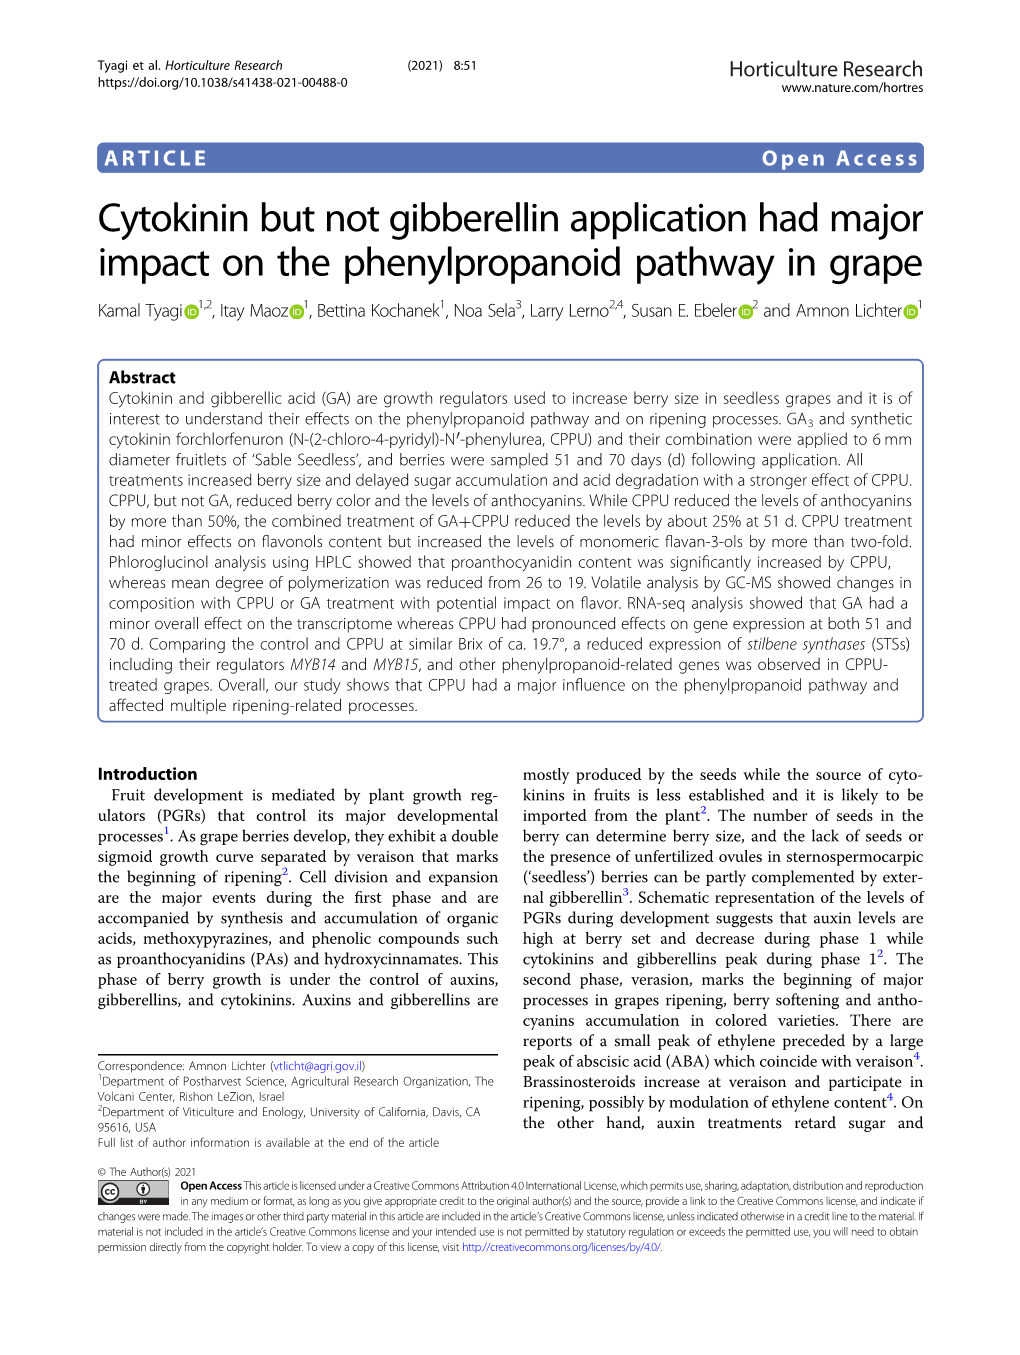 Cytokinin but Not Gibberellin Application Had Major Impact on the Phenylpropanoid Pathway in Grape